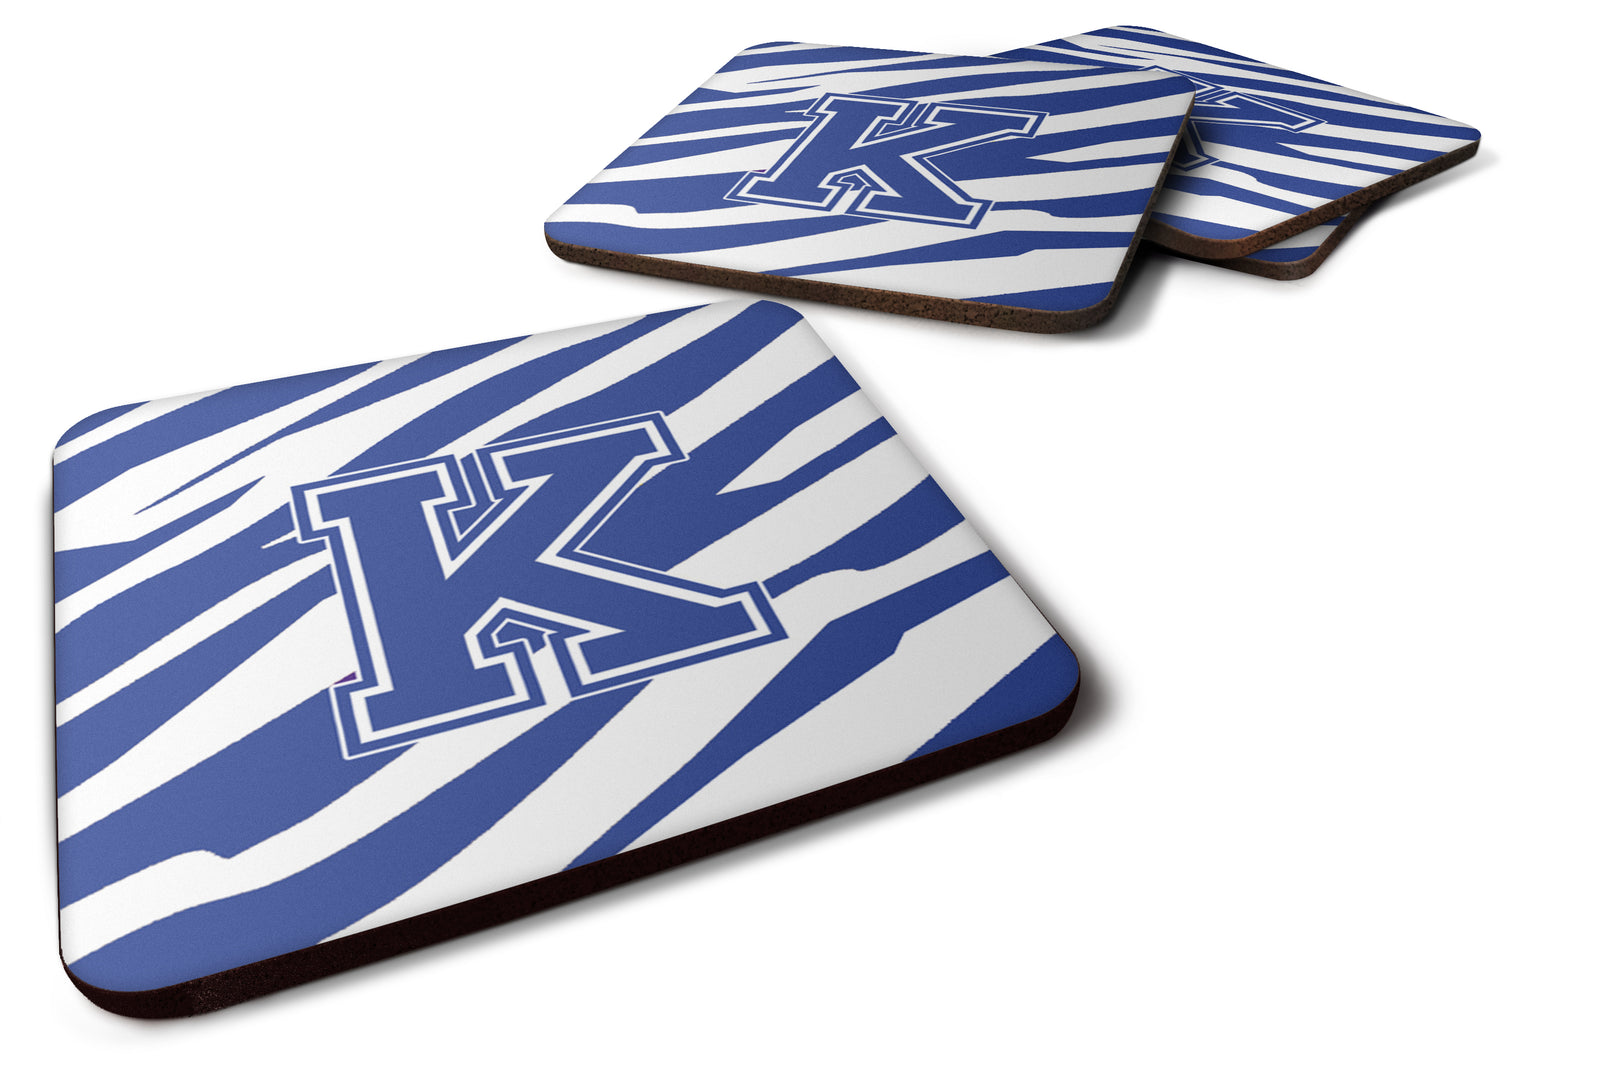 Set of 4 Monogram - Tiger Stripe Blue and White Foam Coasters Initial Letter K - the-store.com